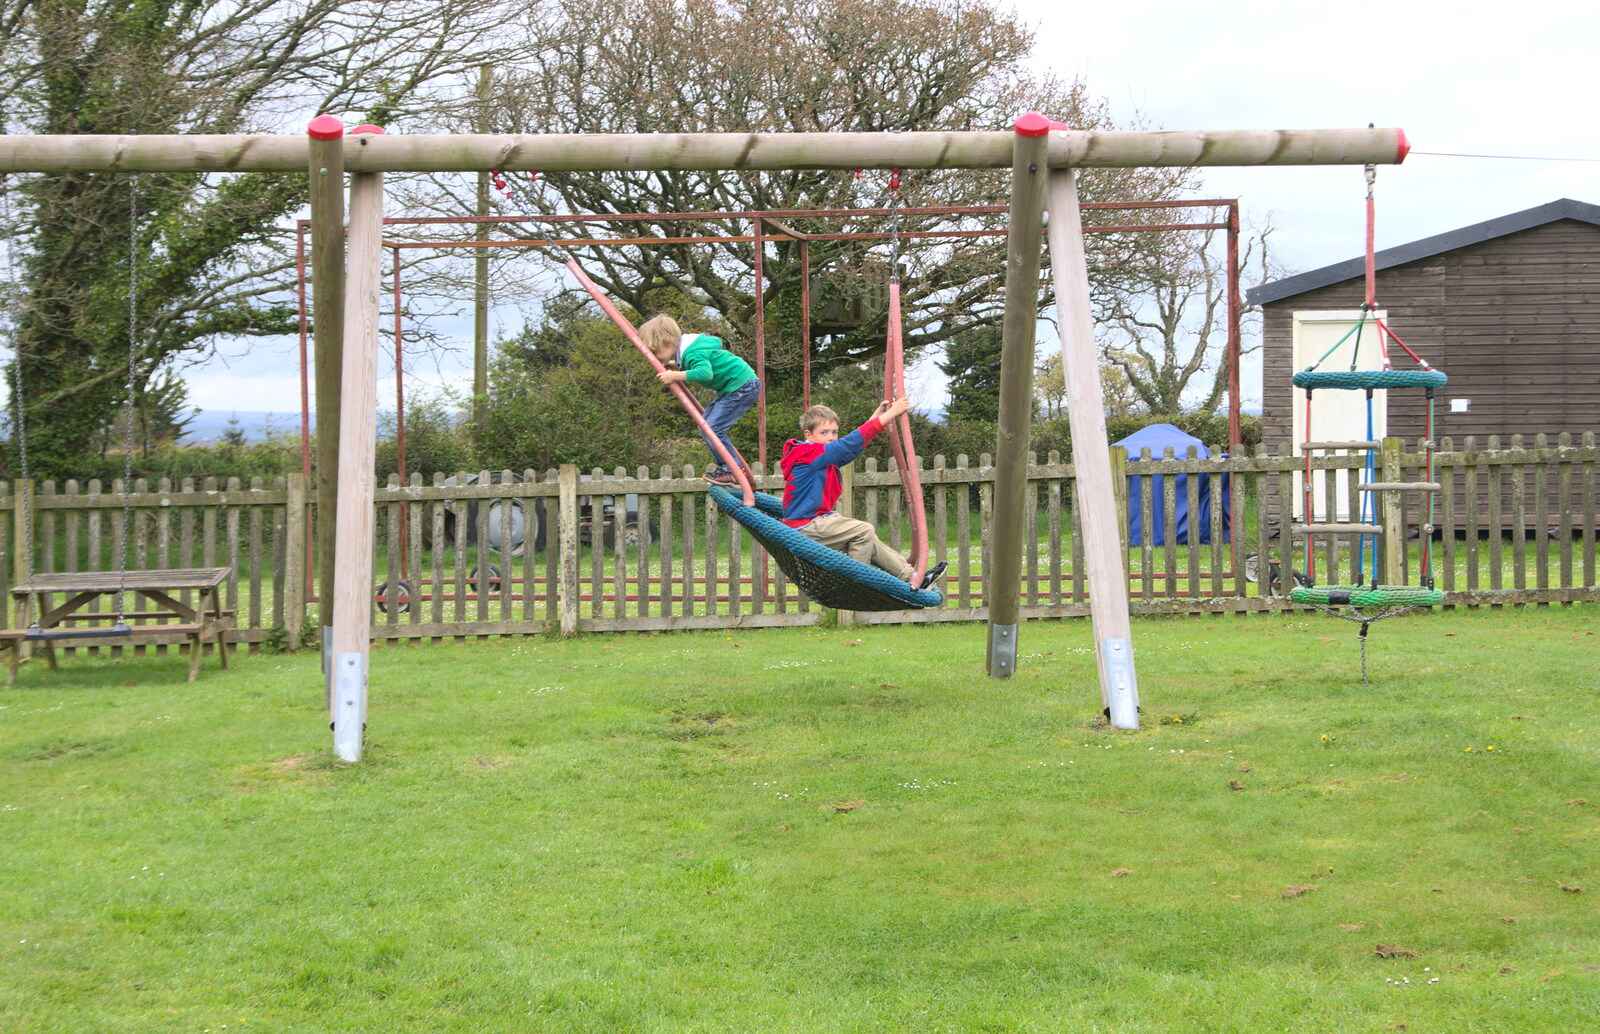 The boys are on the swing again from A Barbeque, Grimspound and Pizza, Dartmoor and Exeter, Devon - 15th April 2017